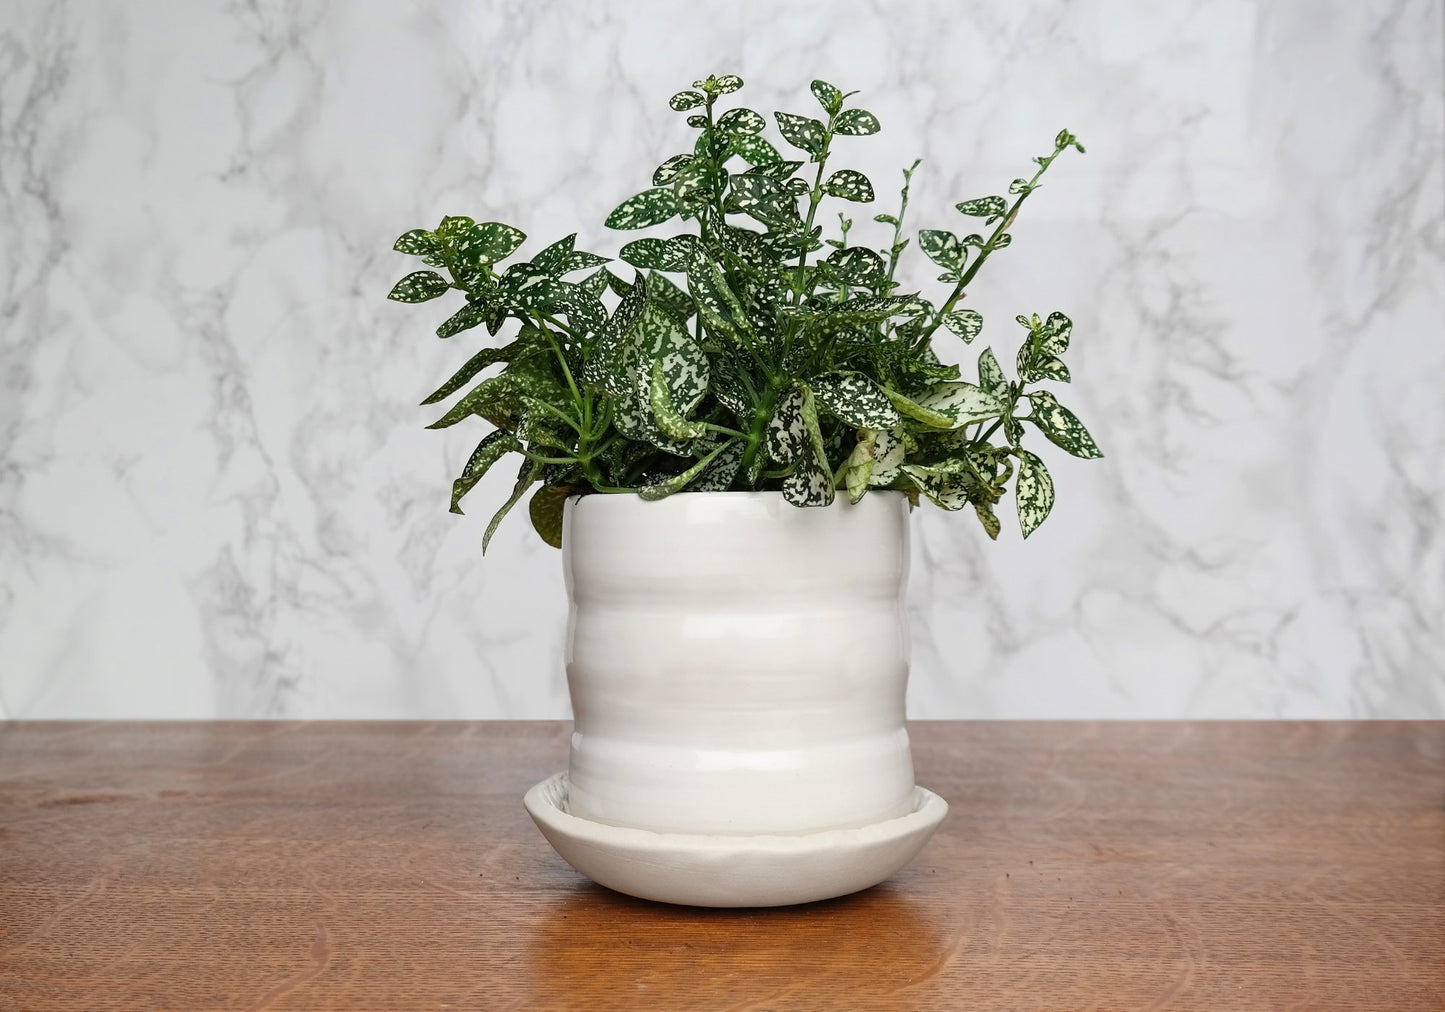 White Ceramic Planter with Saucer - "Stay Wild" - Stuck in the Mud Pottery